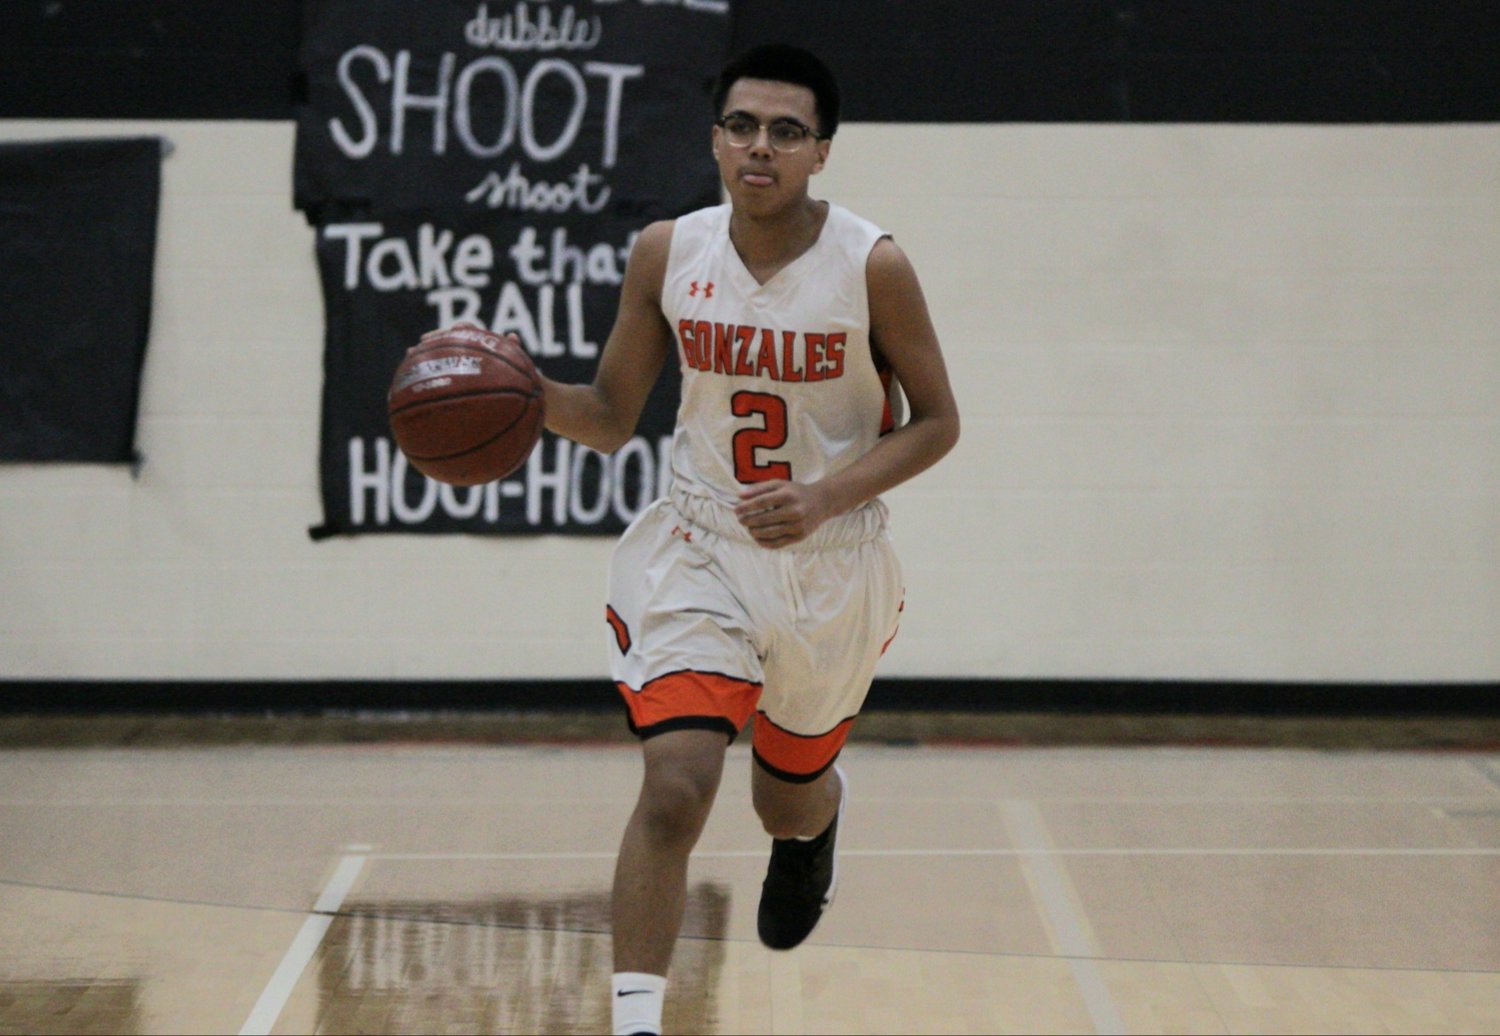 Xavier Aguayo (2) led the team in scoring with 17 points in Gonzales’ 64-55 victory over Navarro on Friday. The Apaches are now tied in district with the Panthers at 5-3.